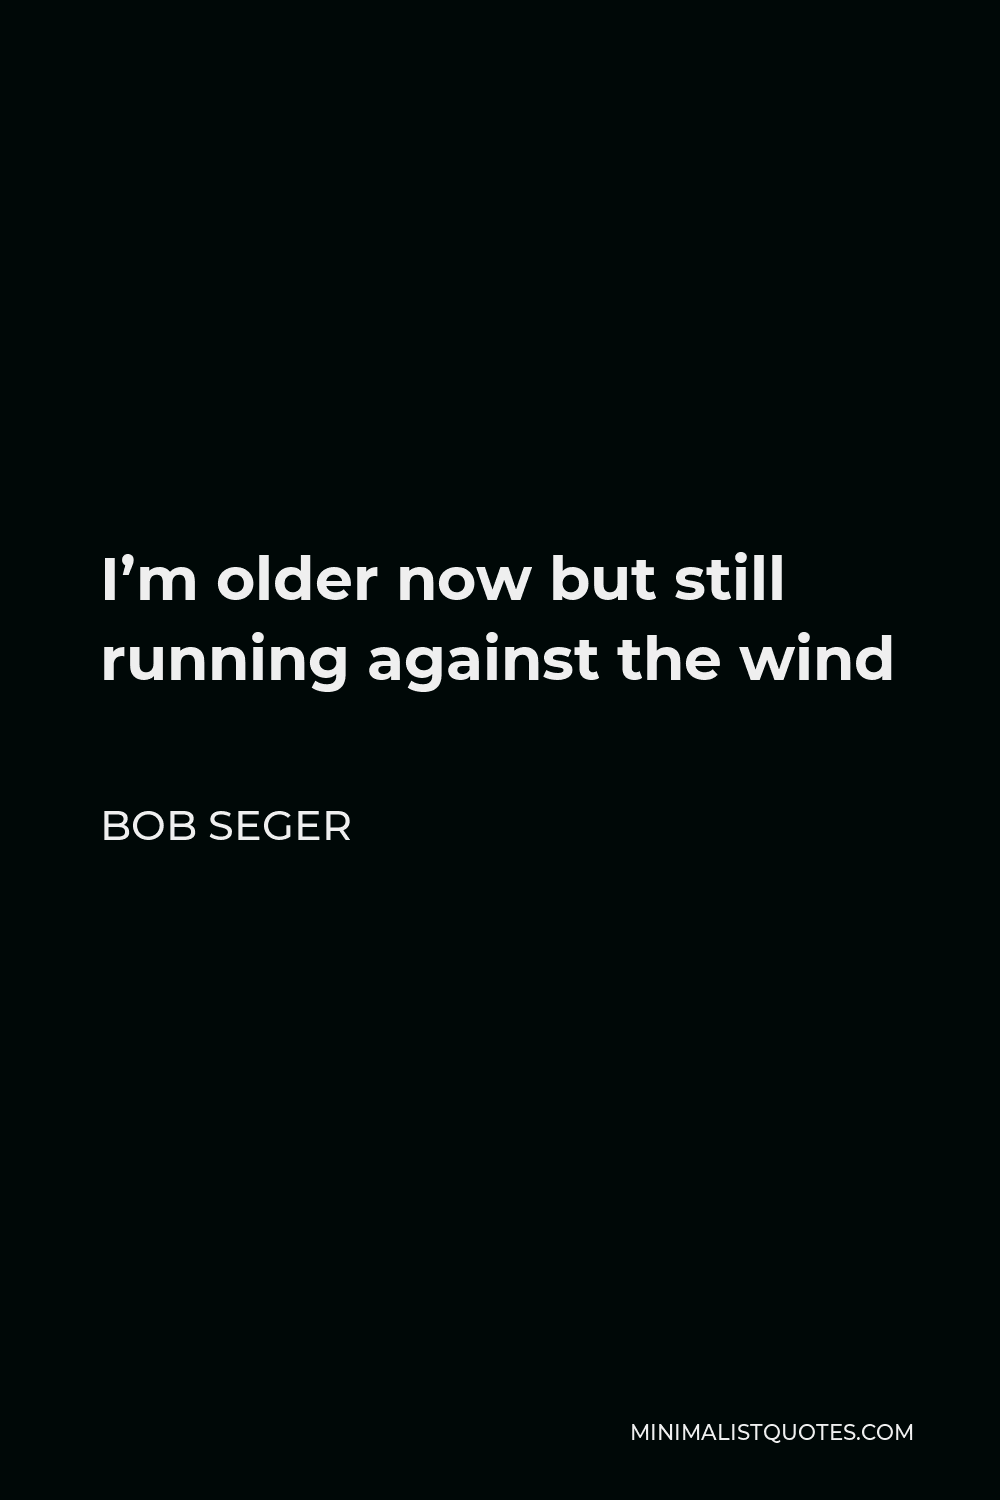 Bob Seger Quote - I’m older now but still running against the wind